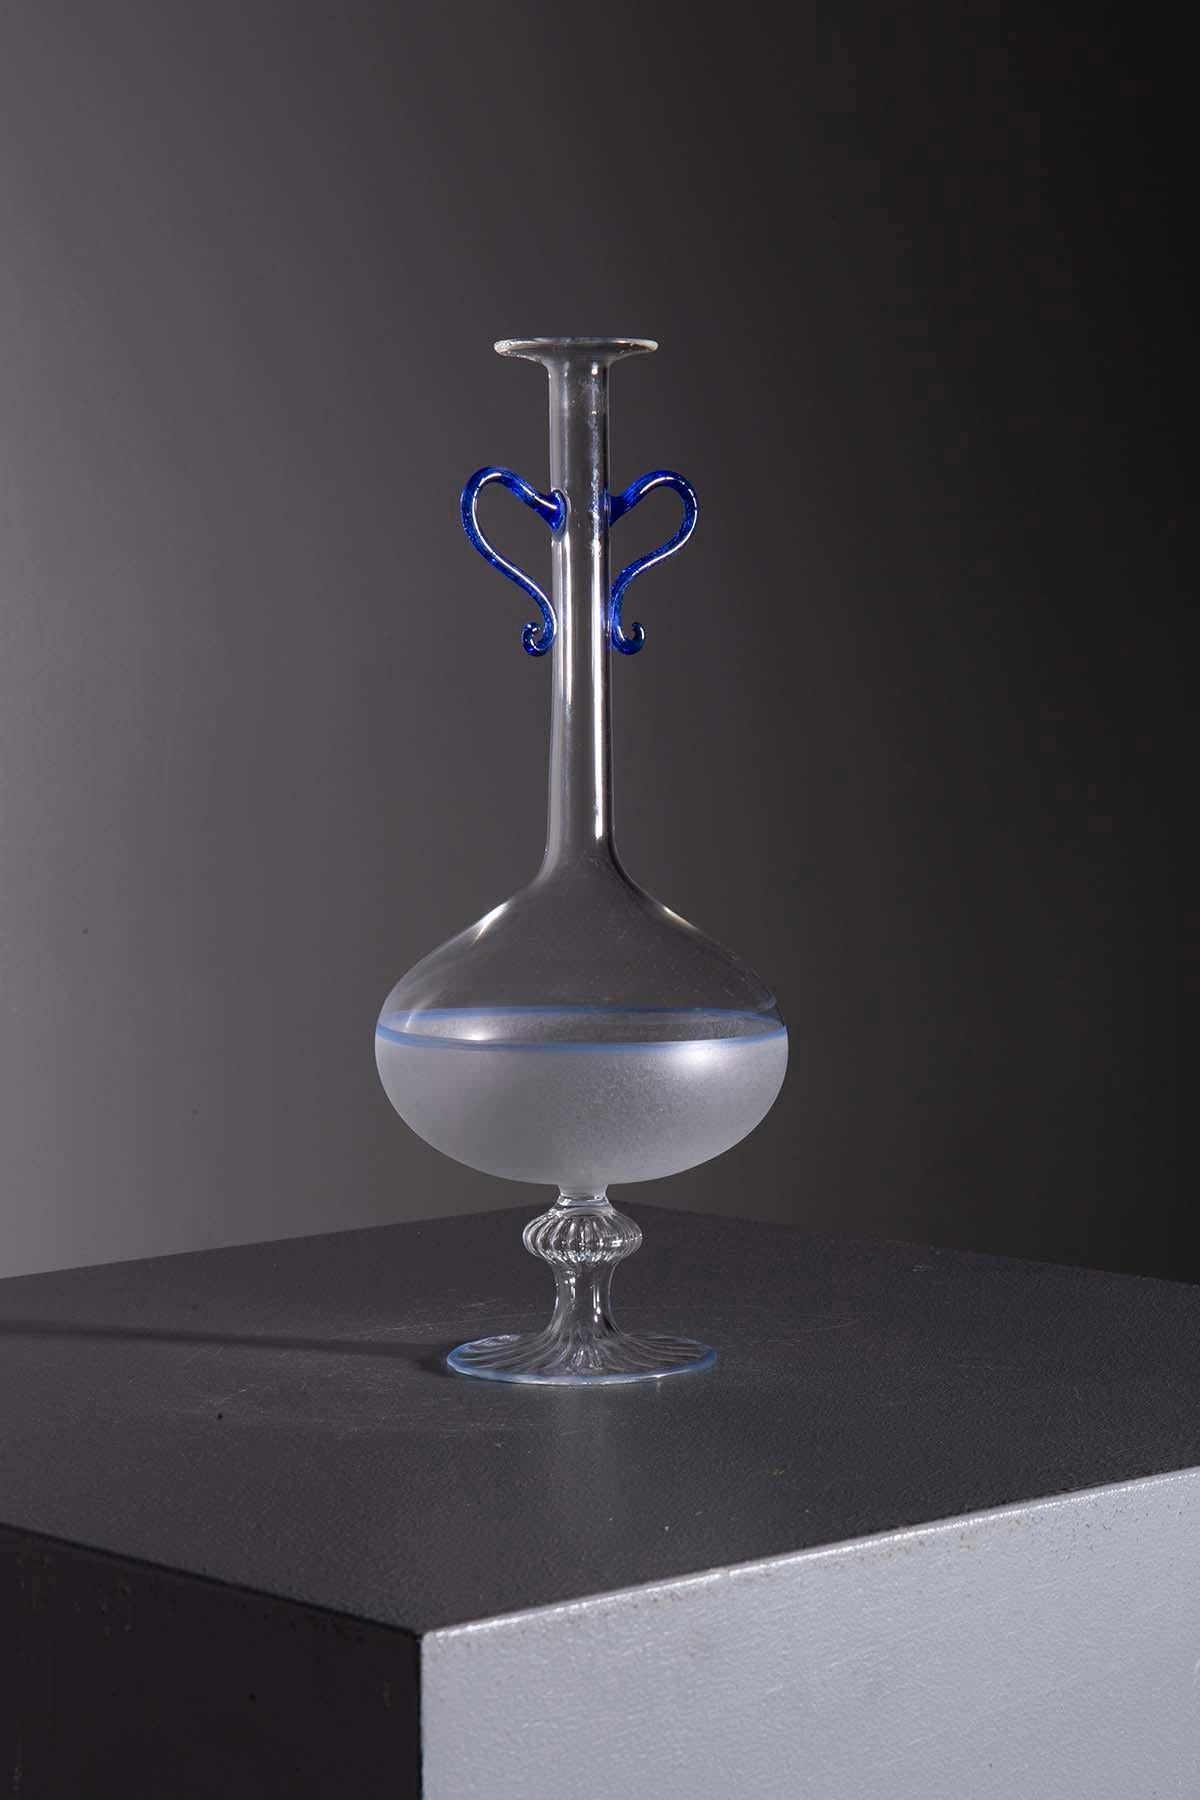 Vintage Murano Vase from the early 1900s: The Elegance of Italian Glass

Welcome to the fascinating world of Murano glass art, embodied in this period vase of extraordinary beauty, made by the prestigious Murano factory in the early 1900s. This